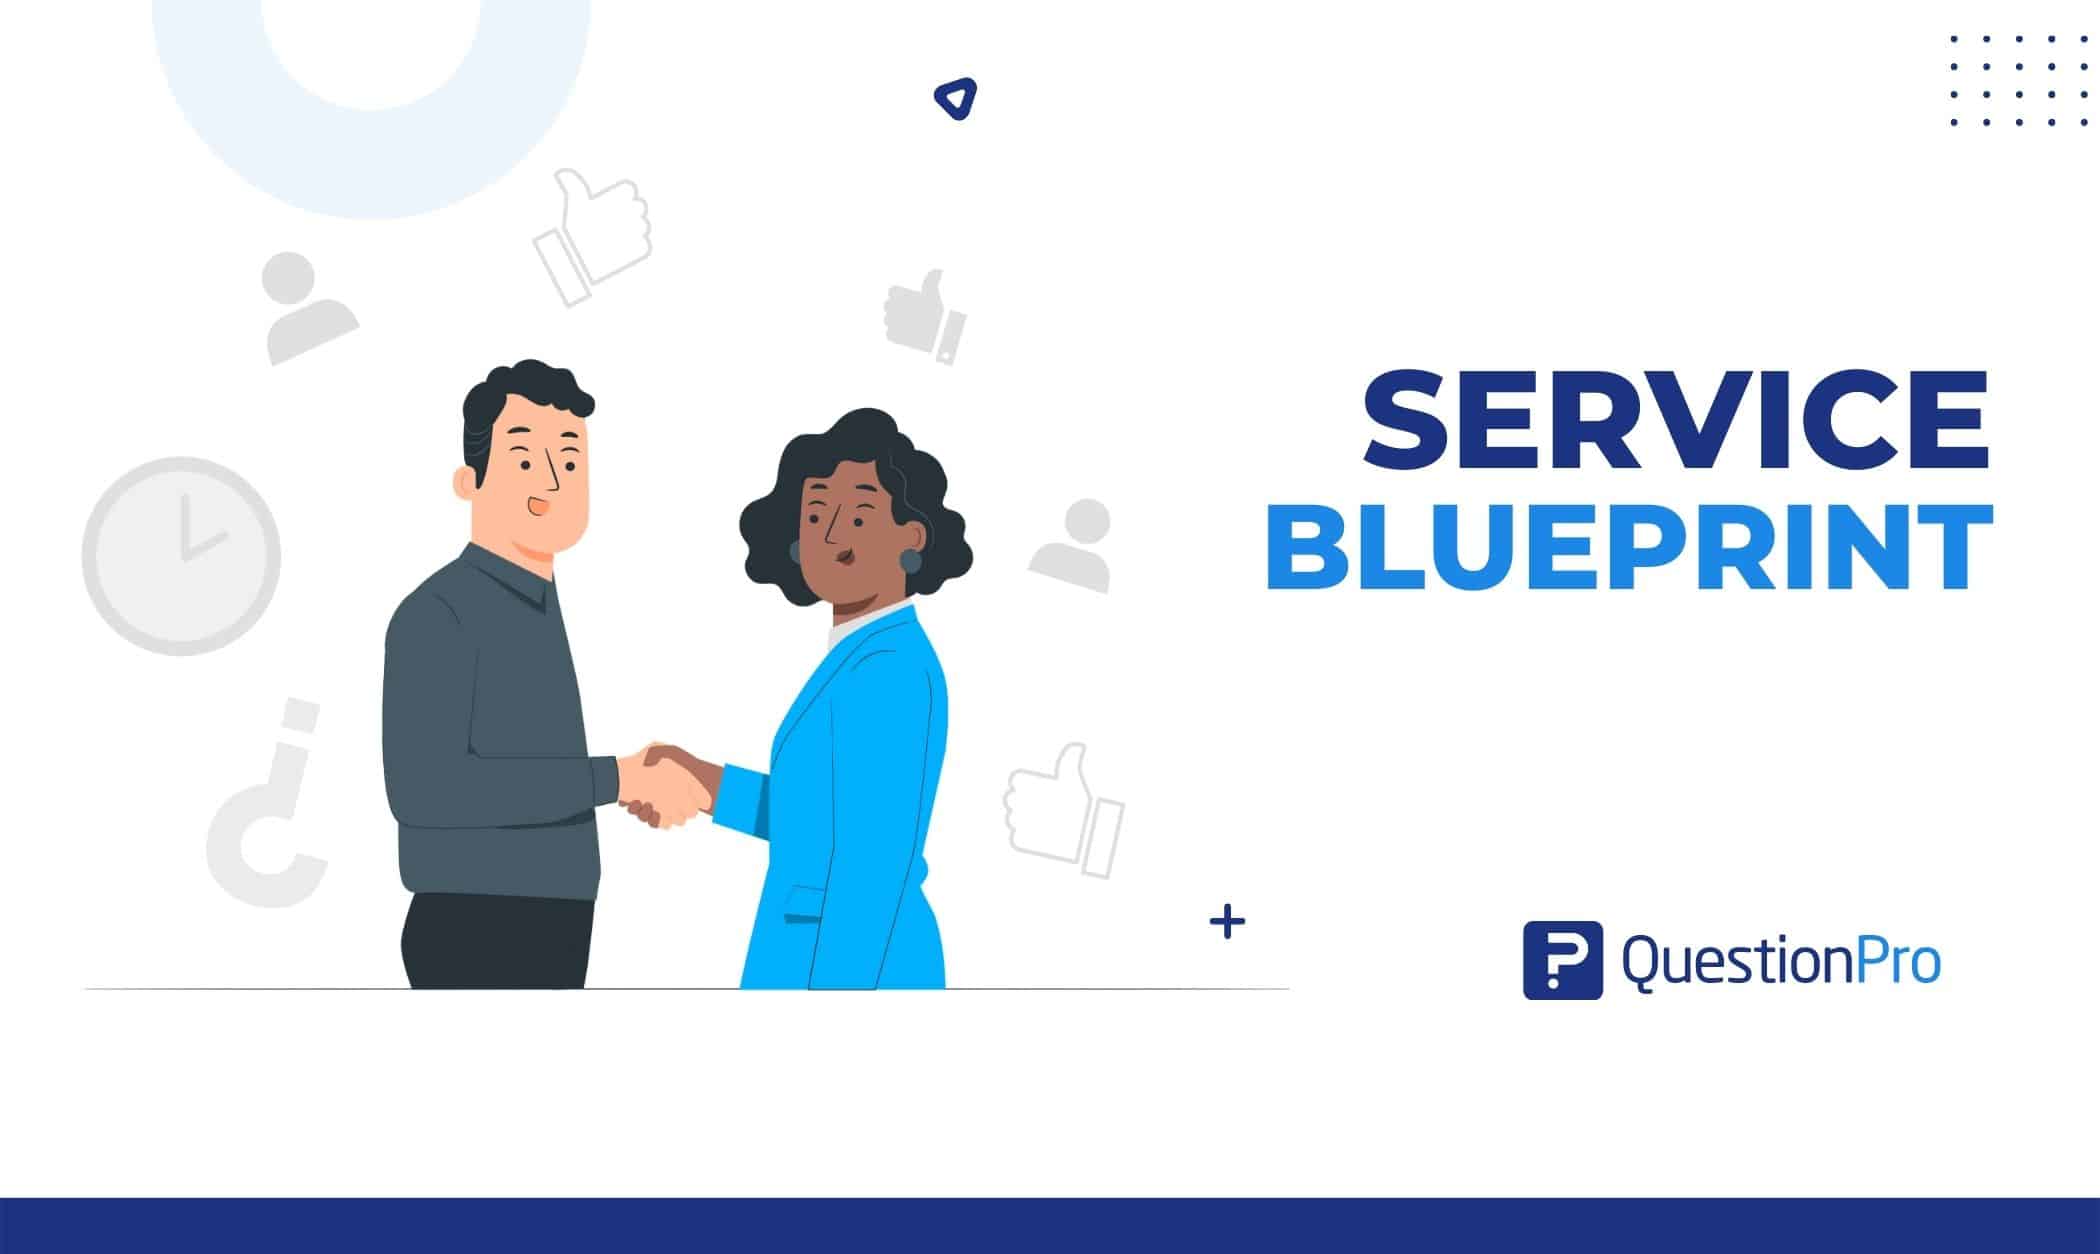 The service blueprint is a map that helps managers see company's service. It helps companies understand services, resources, and processes.